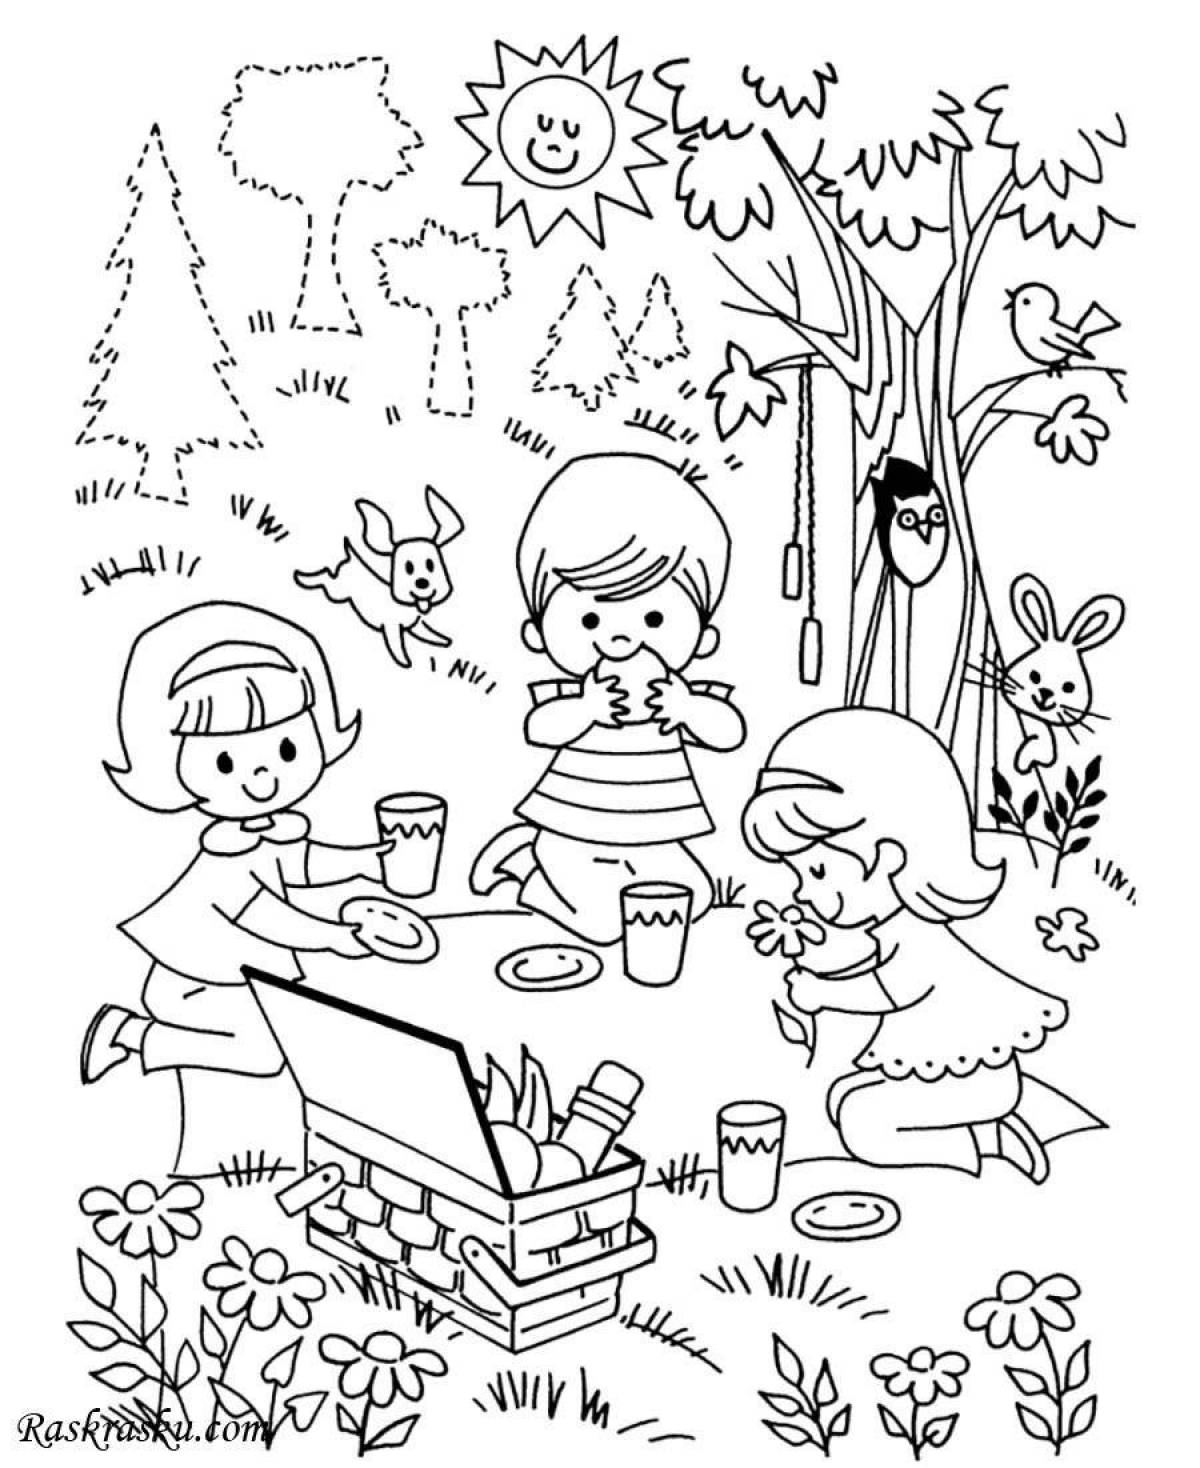 Color-frenzy coloring page kindergarten